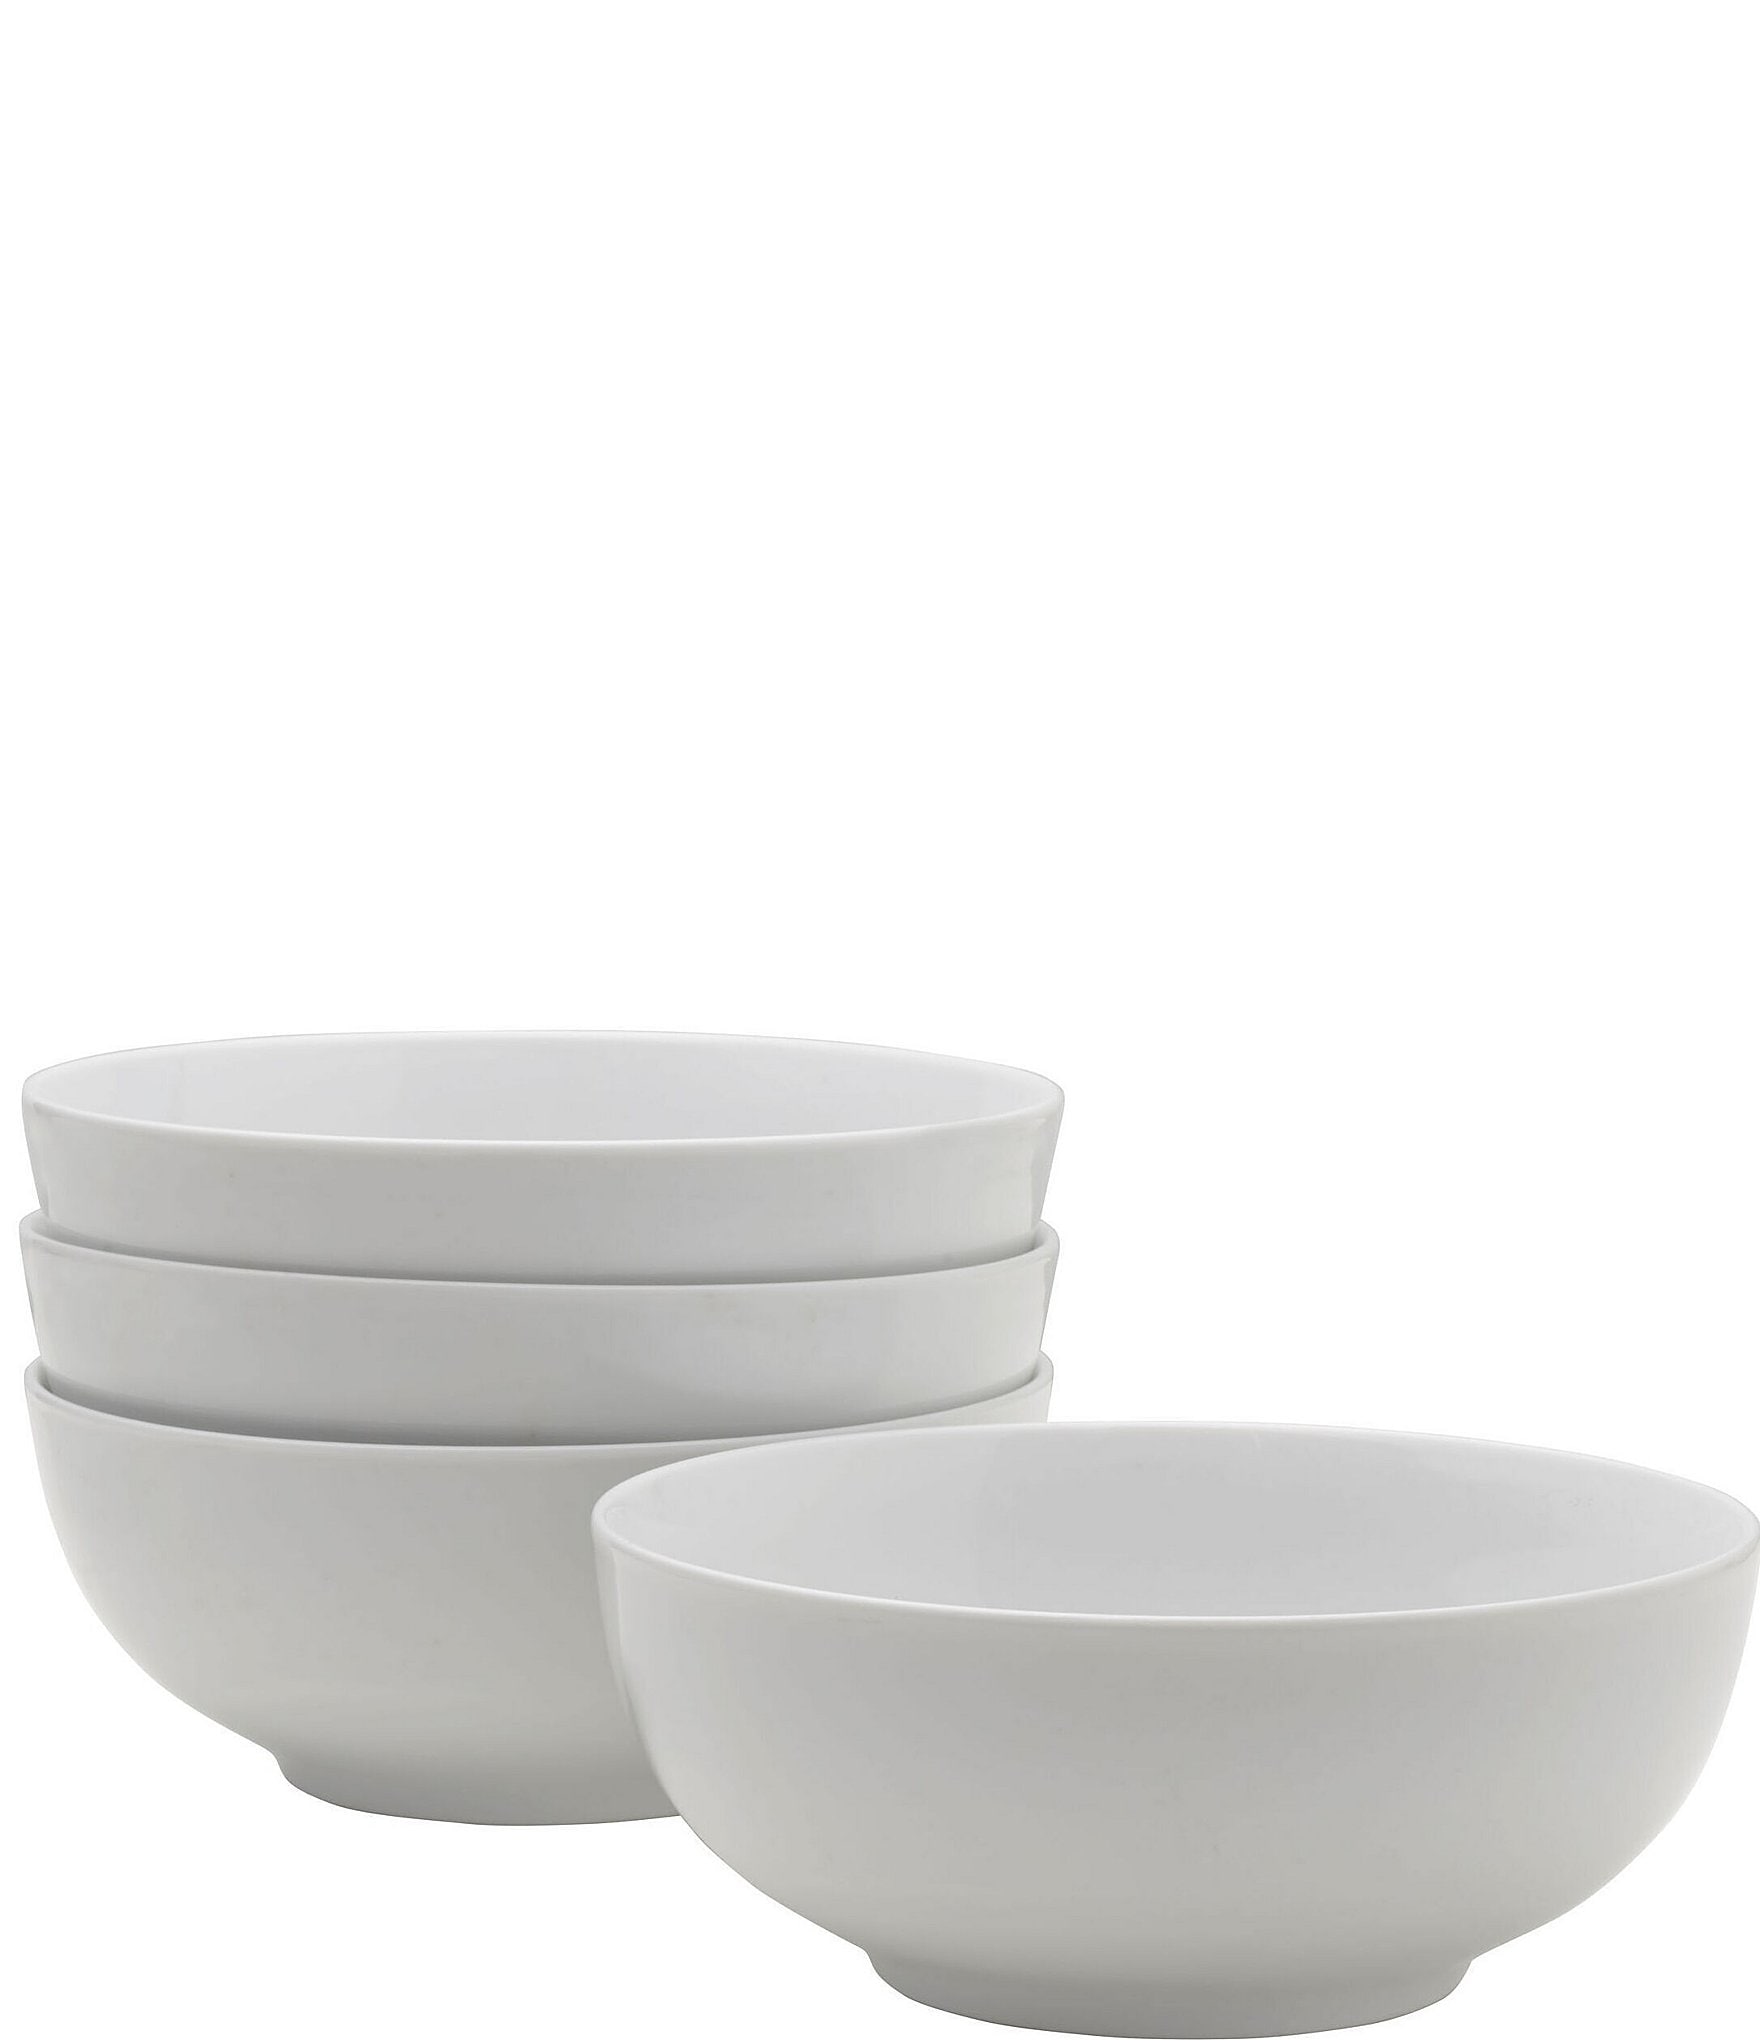 https://dimg.dillards.com/is/image/DillardsZoom/zoom/fitz-and-floyd-everyday-white-cereal-bowls-set-of-4/00000000_zi_53ce0139-6611-405e-a30e-922195eee57c.jpg